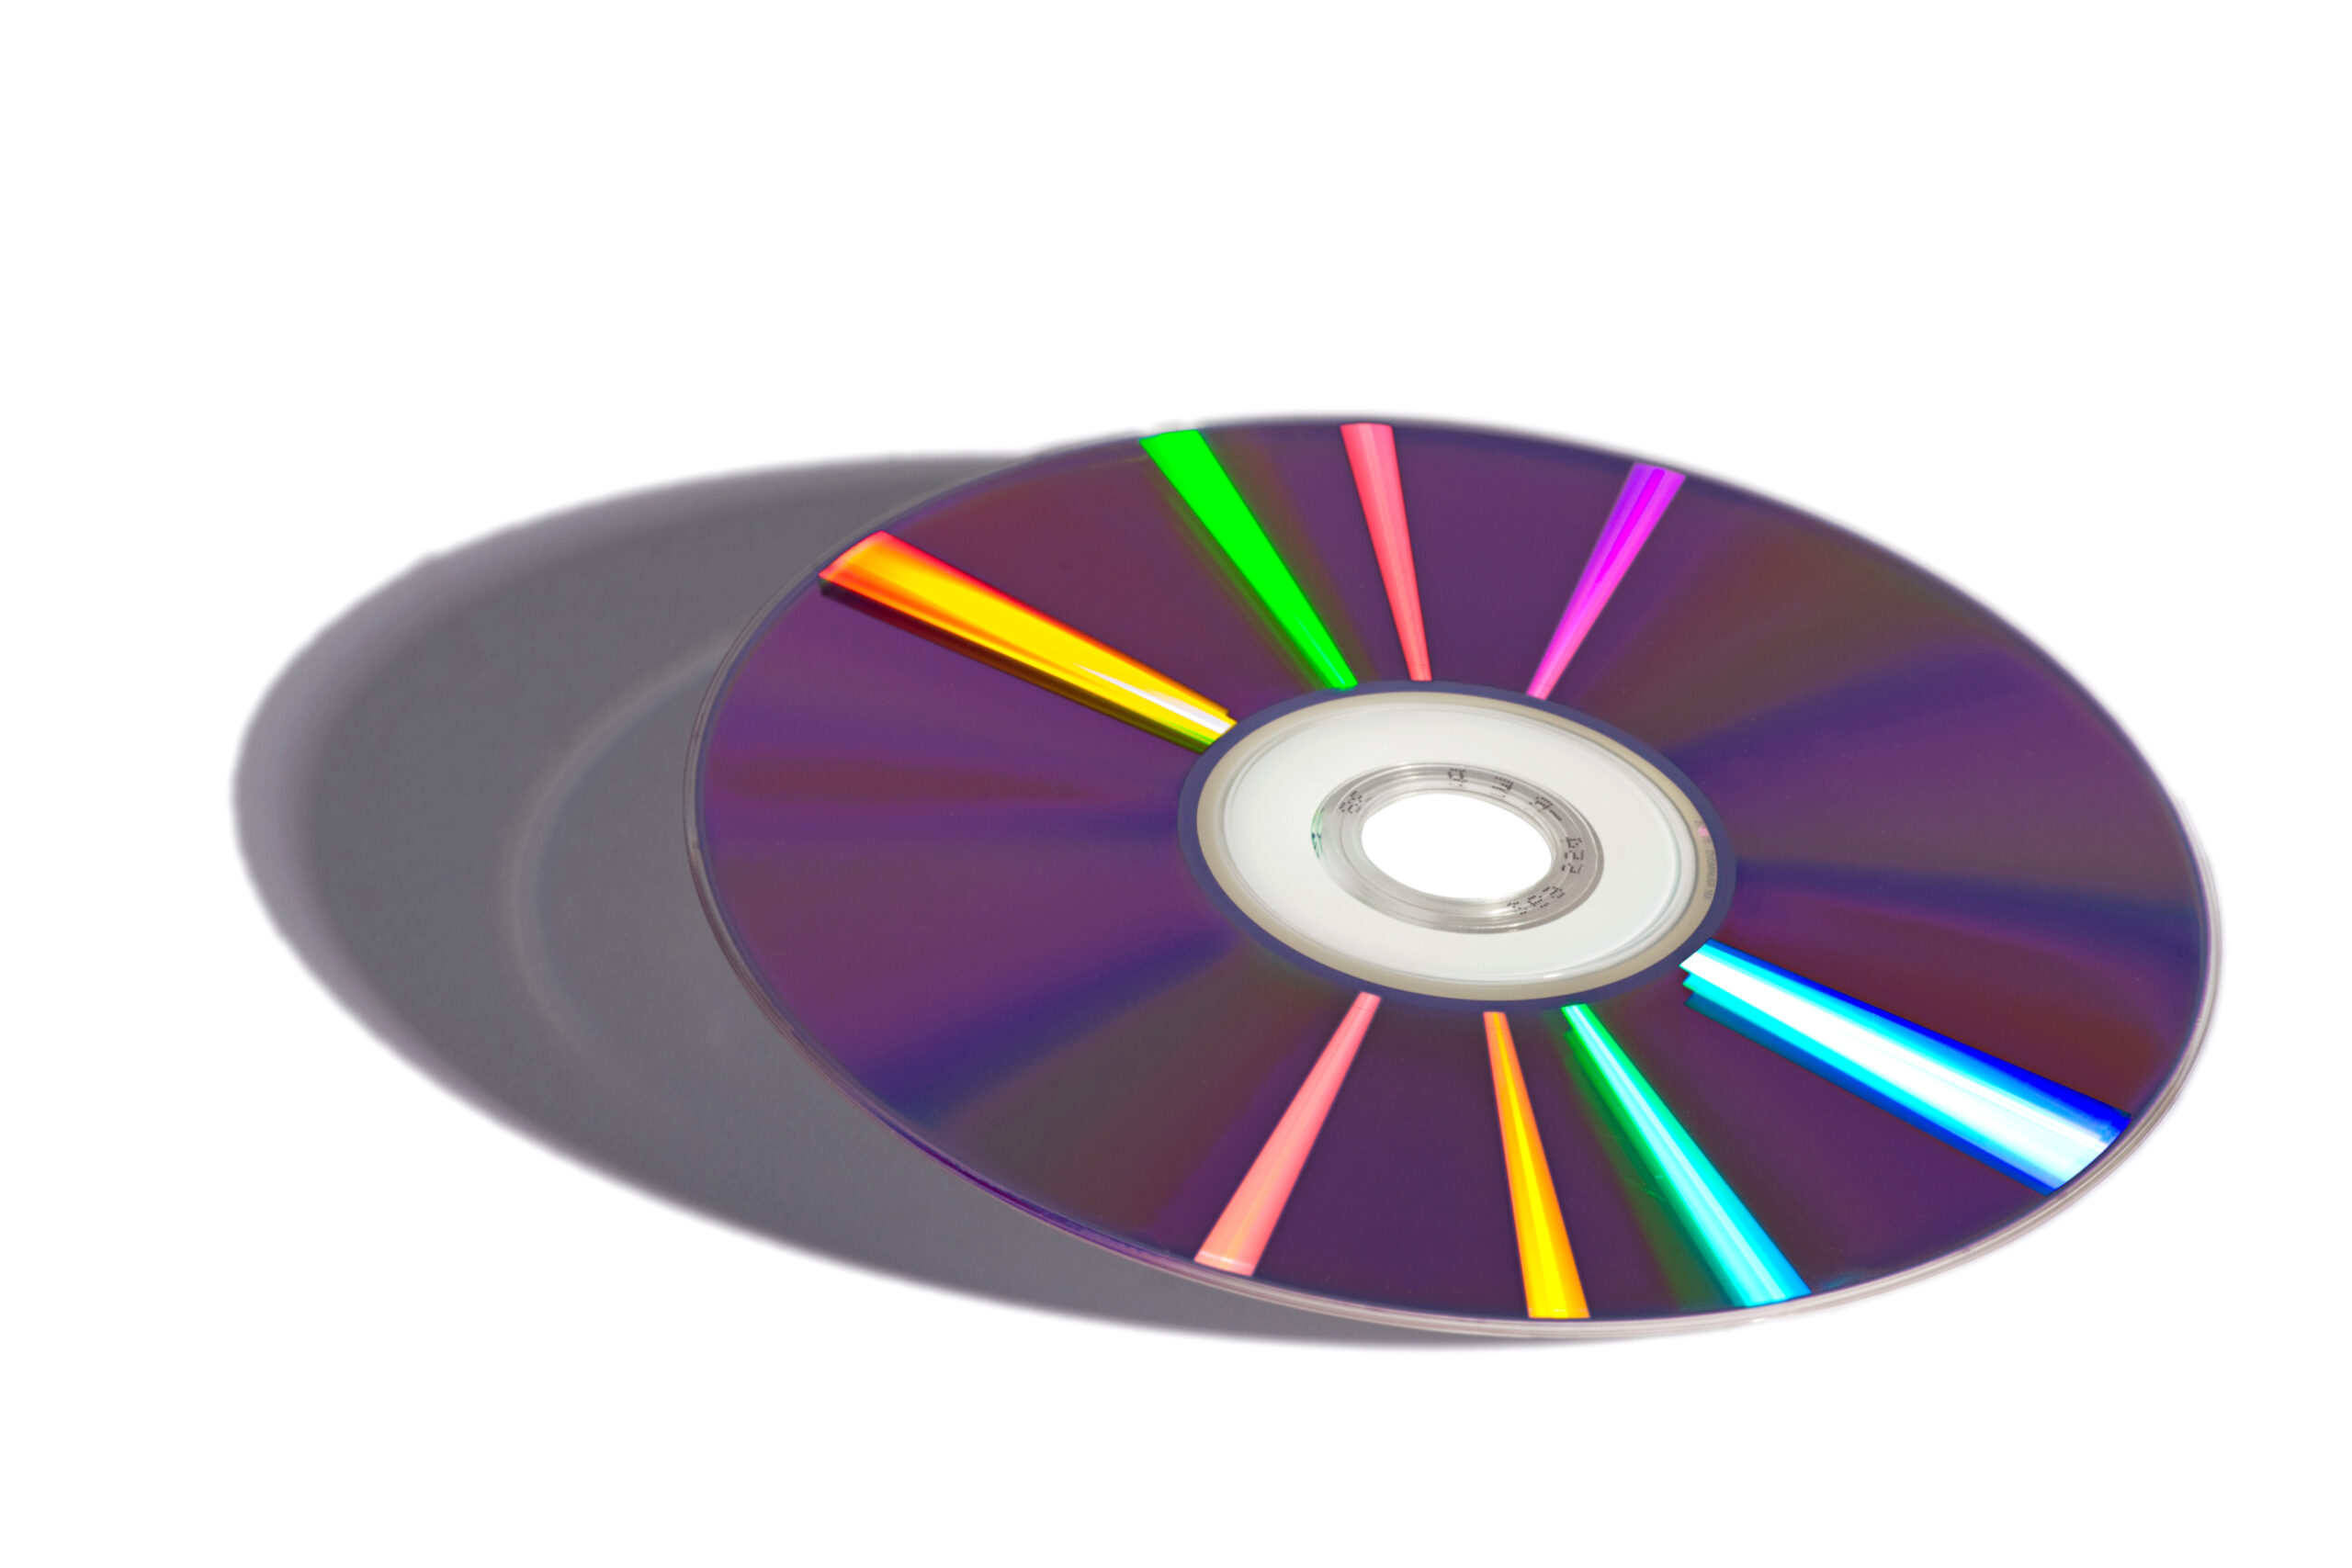 An illustration of a futuristic 10,000 TB CD, showcasing its massive data storage capacity. The CD is depicted with a sleek, high-tech design, emphasizing its cutting-edge technology and potential to revolutionize data storage solutions